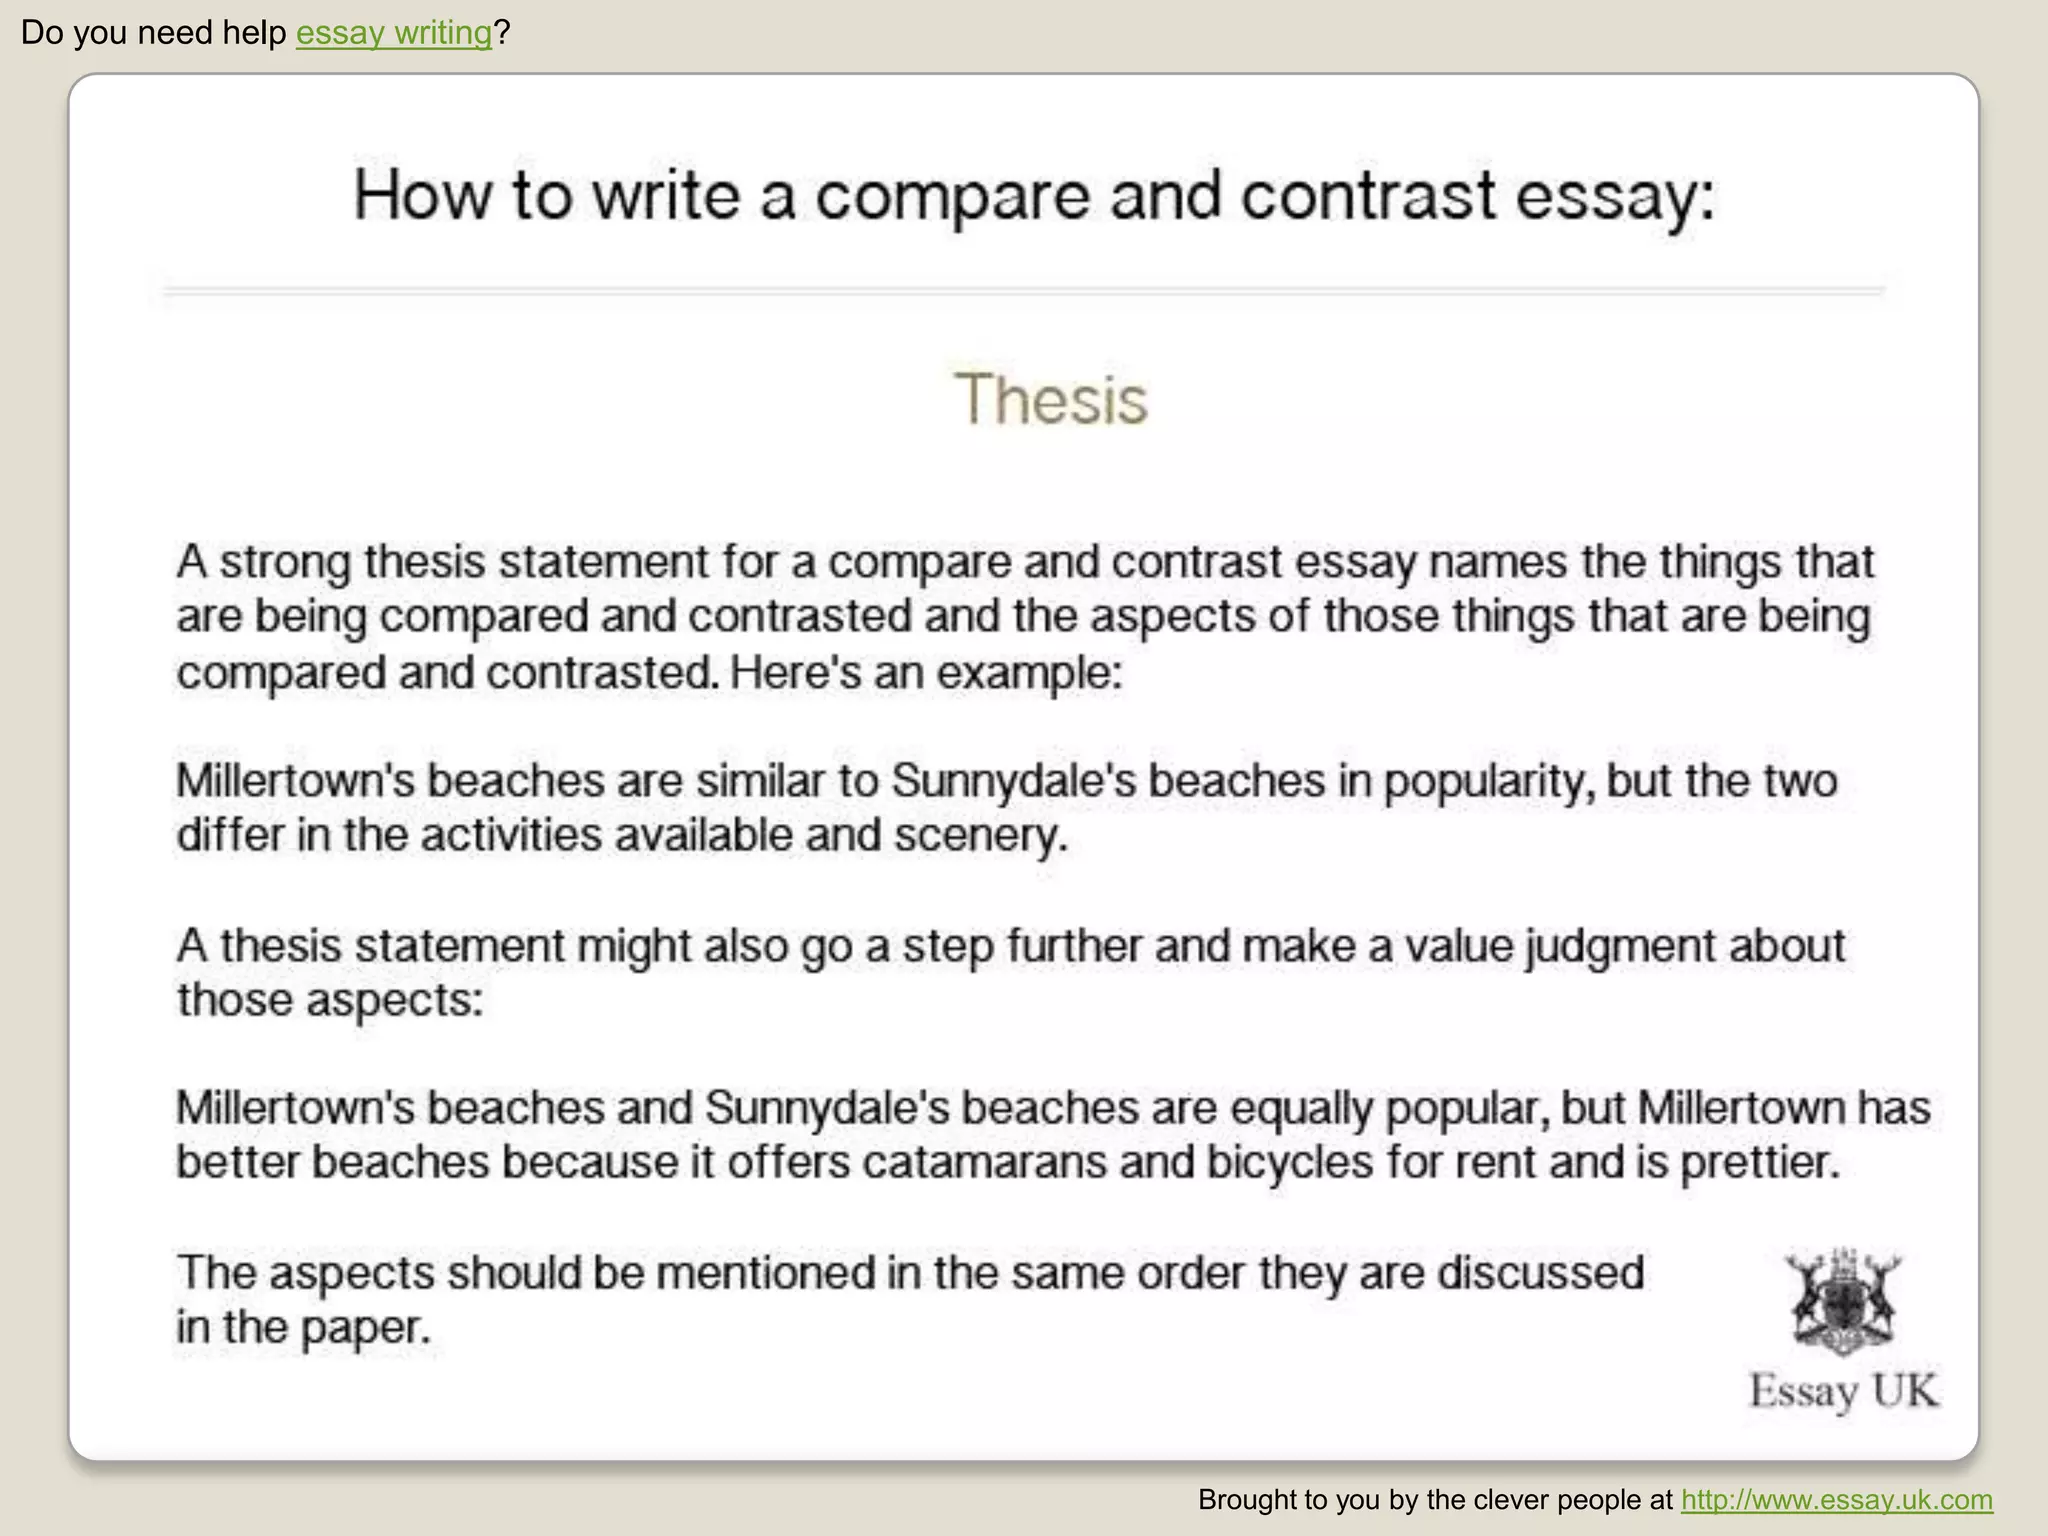 things to compare and contrast for an essay